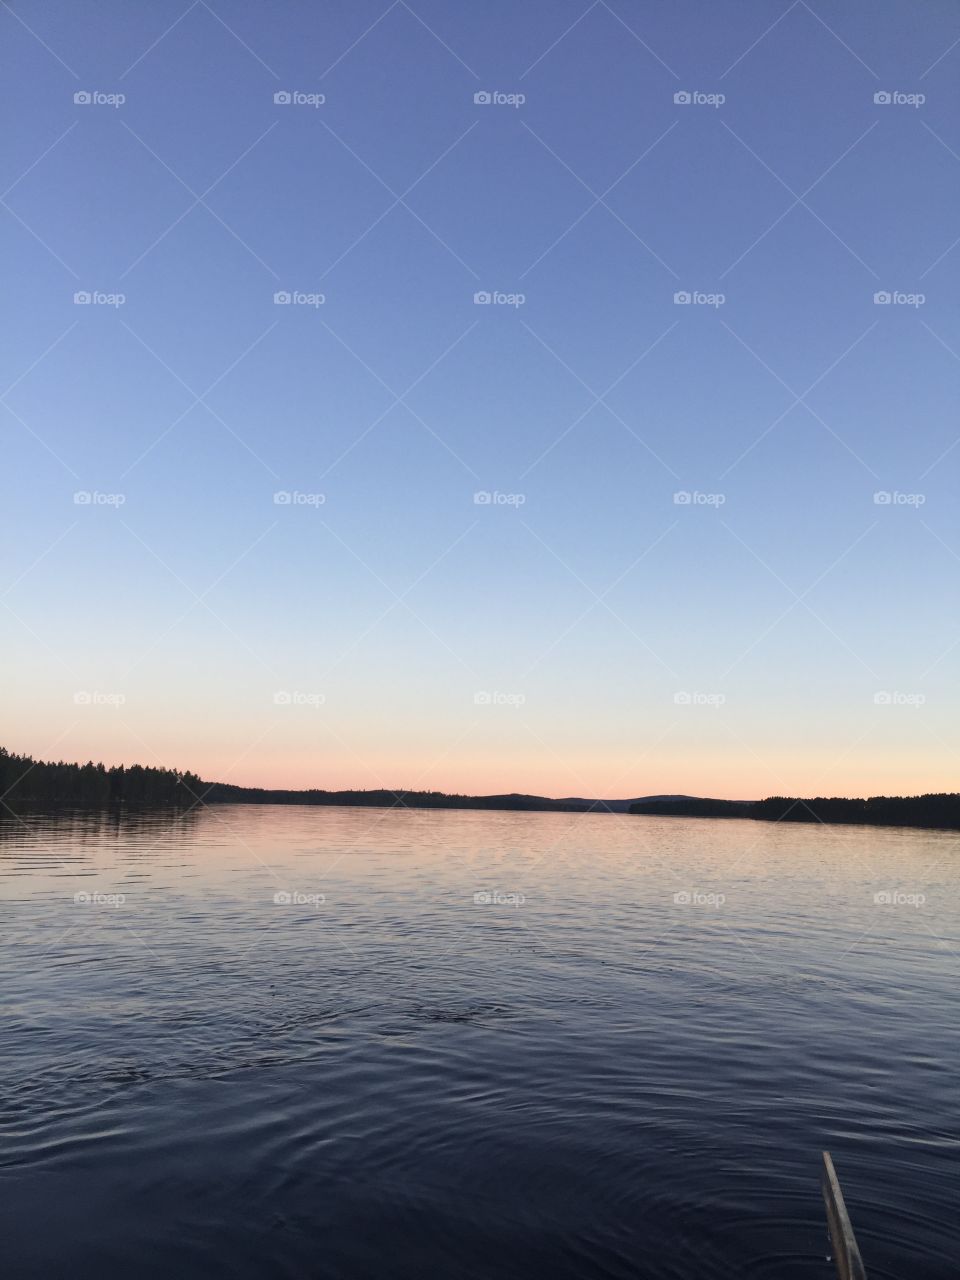 Water, Lake, No Person, River, Sunset